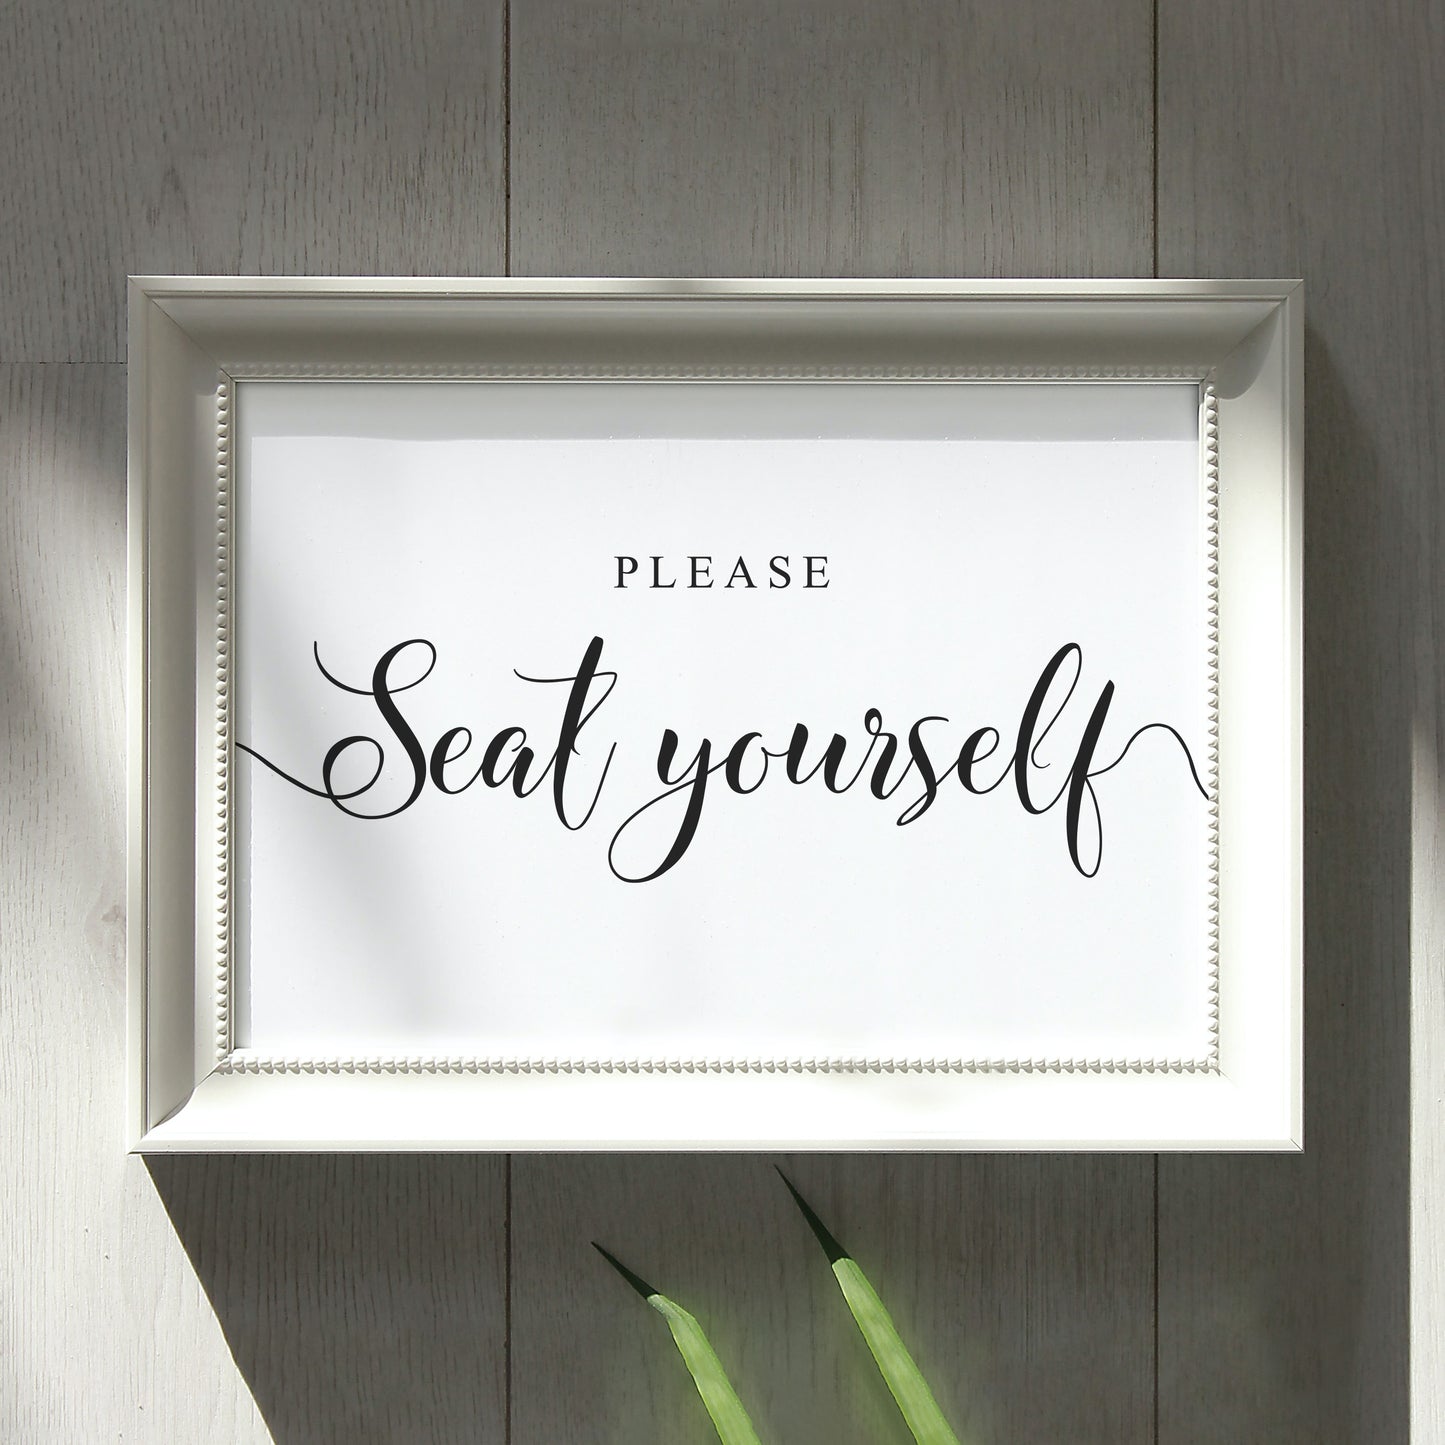 Wedding seating sign. Please seat yourself instant download PDF